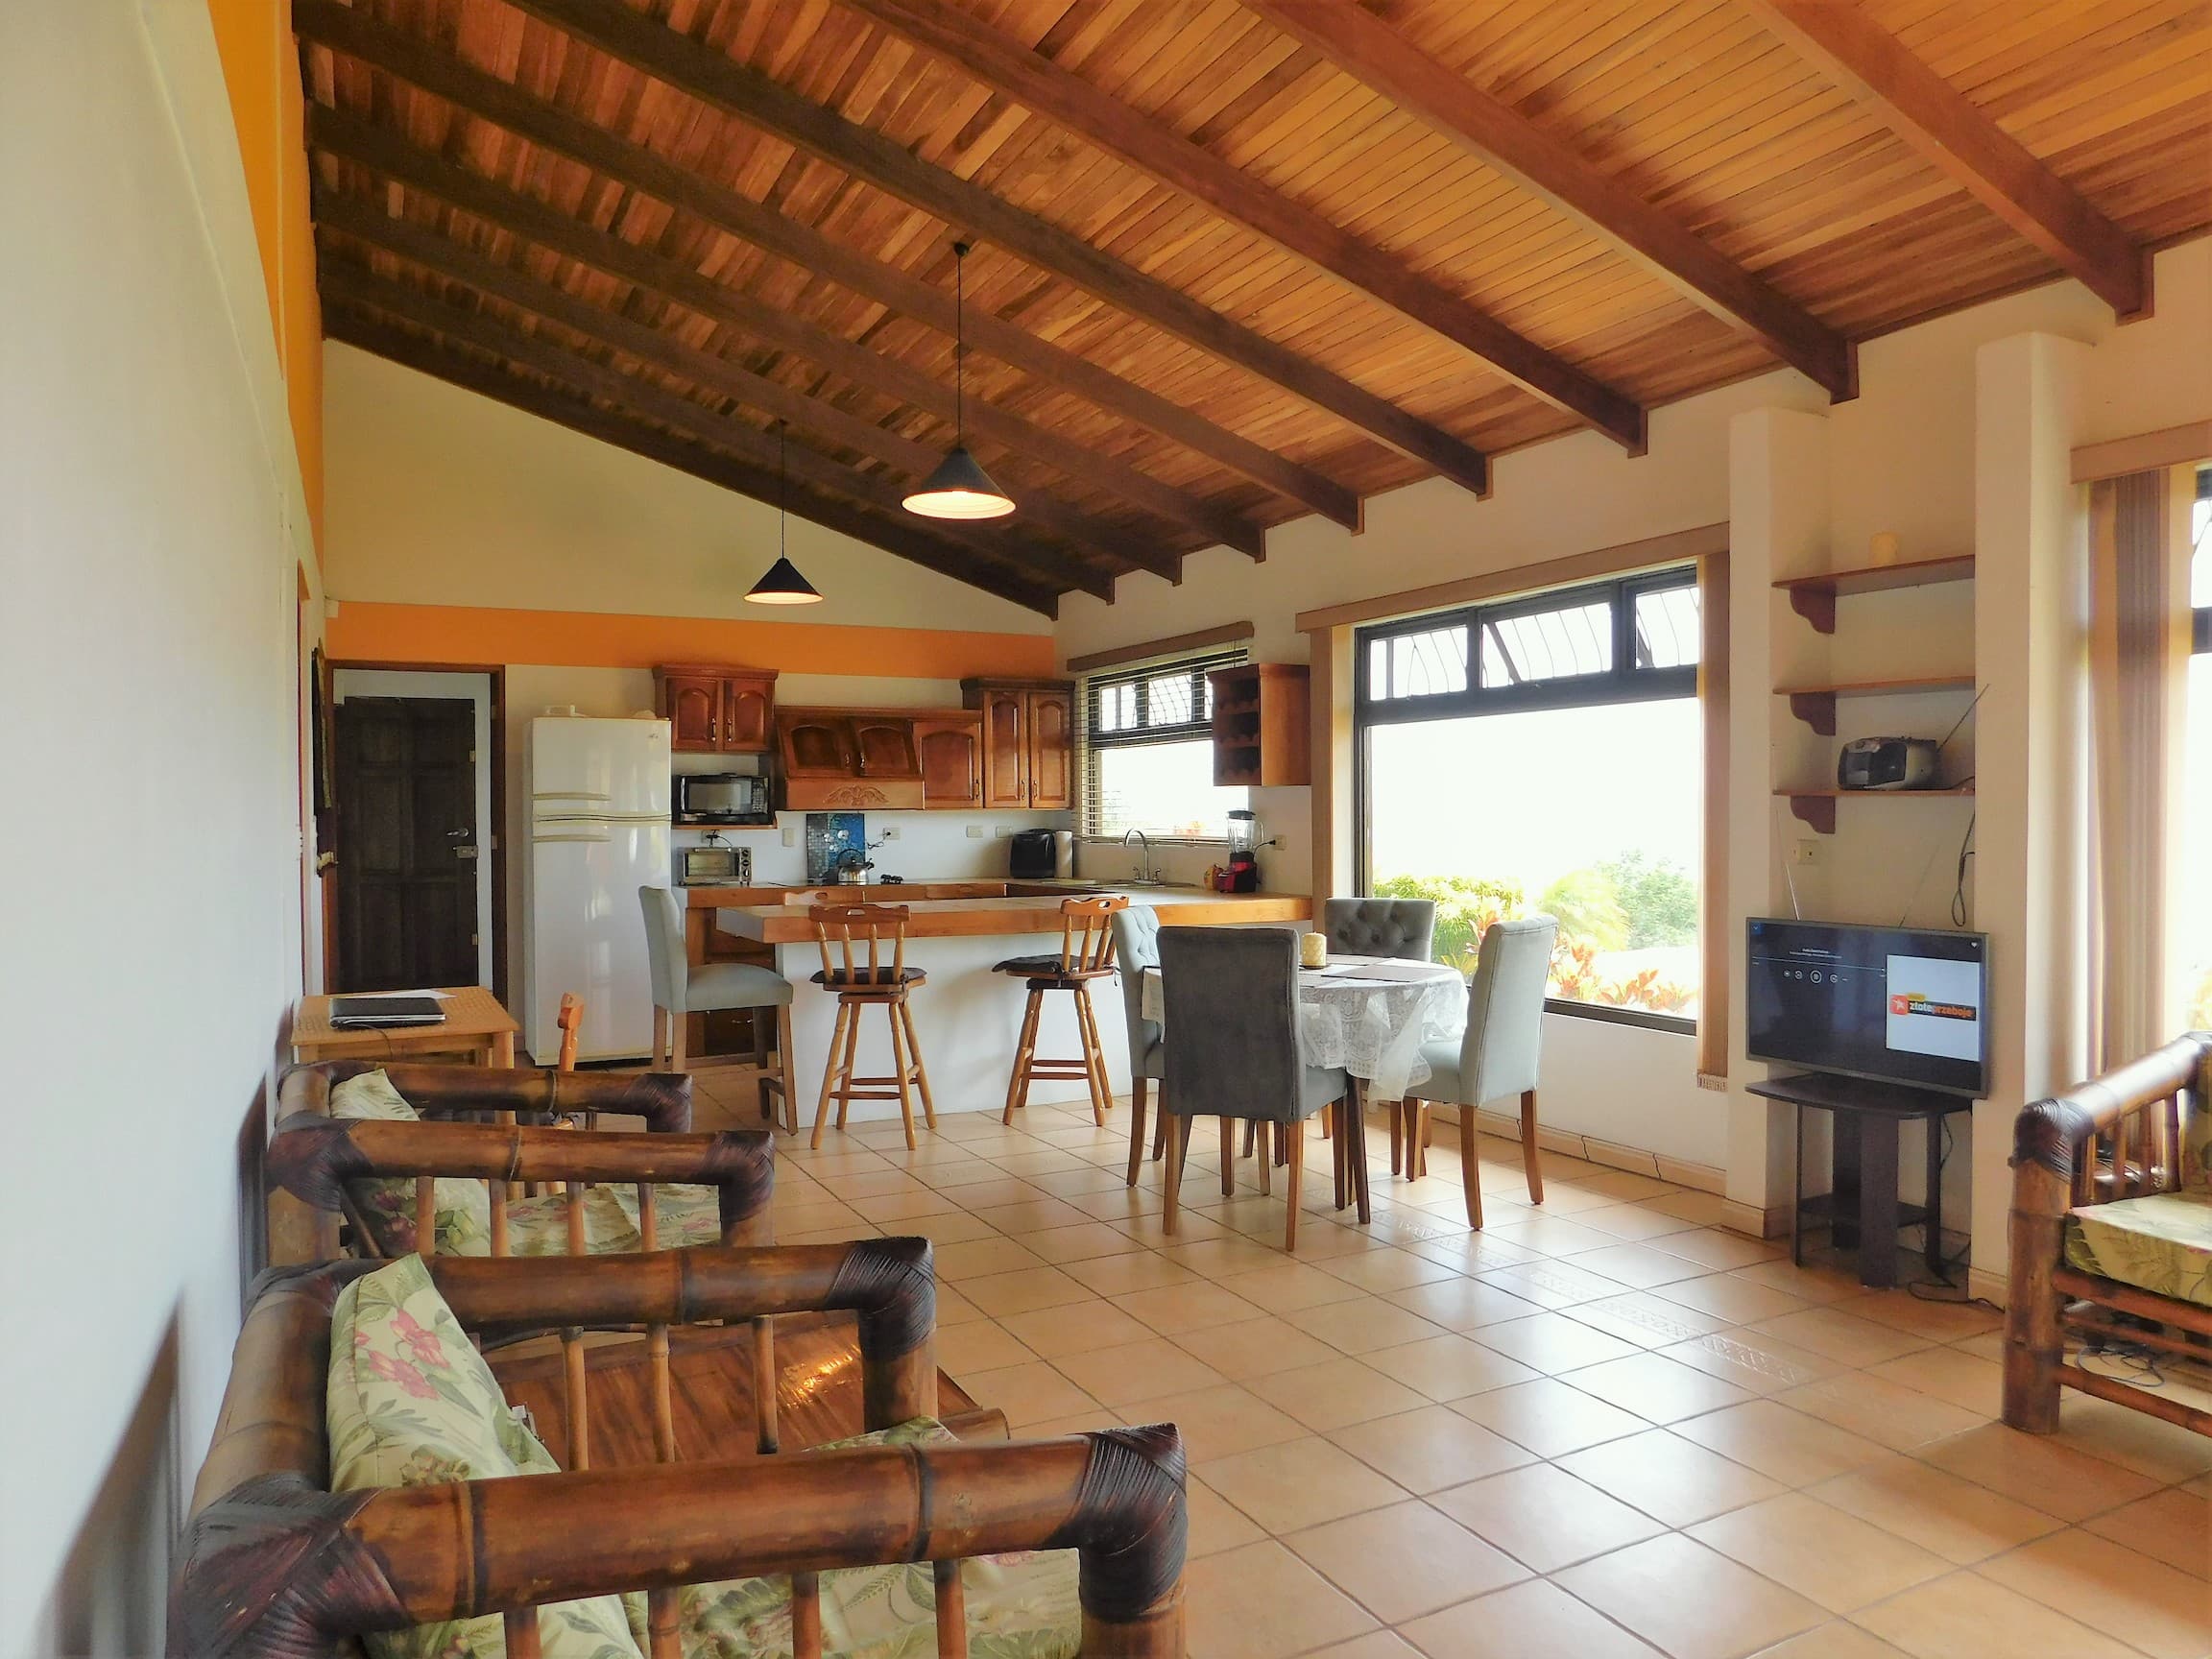 Family or B&B style Home for Sale in Mountains of Costa Rica